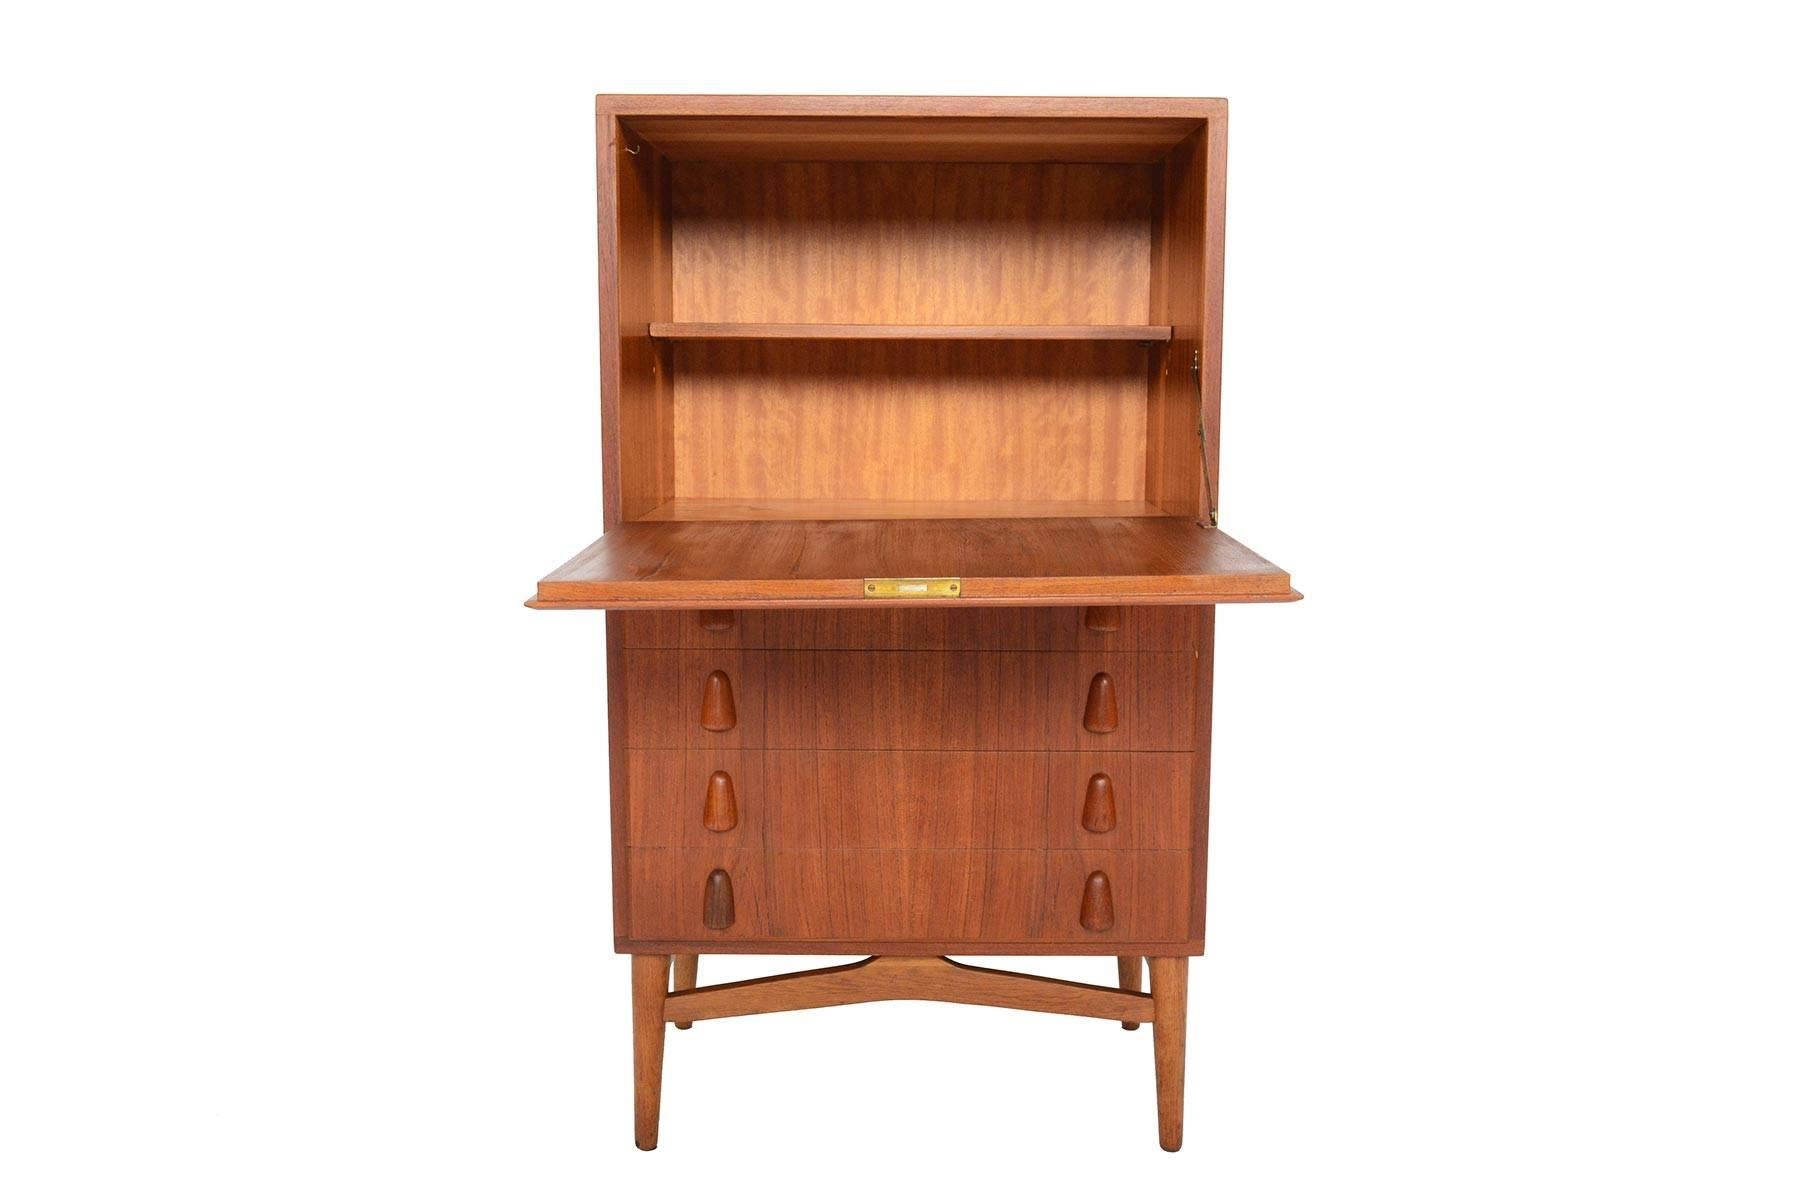 This Danish modern midcentury dry bar dresser in teak will be a wonderful addition to any modern home. This wonderful piece features a large drop down door which opens to expose a spacious interior with an adjustable shelf. Four drawers sit below